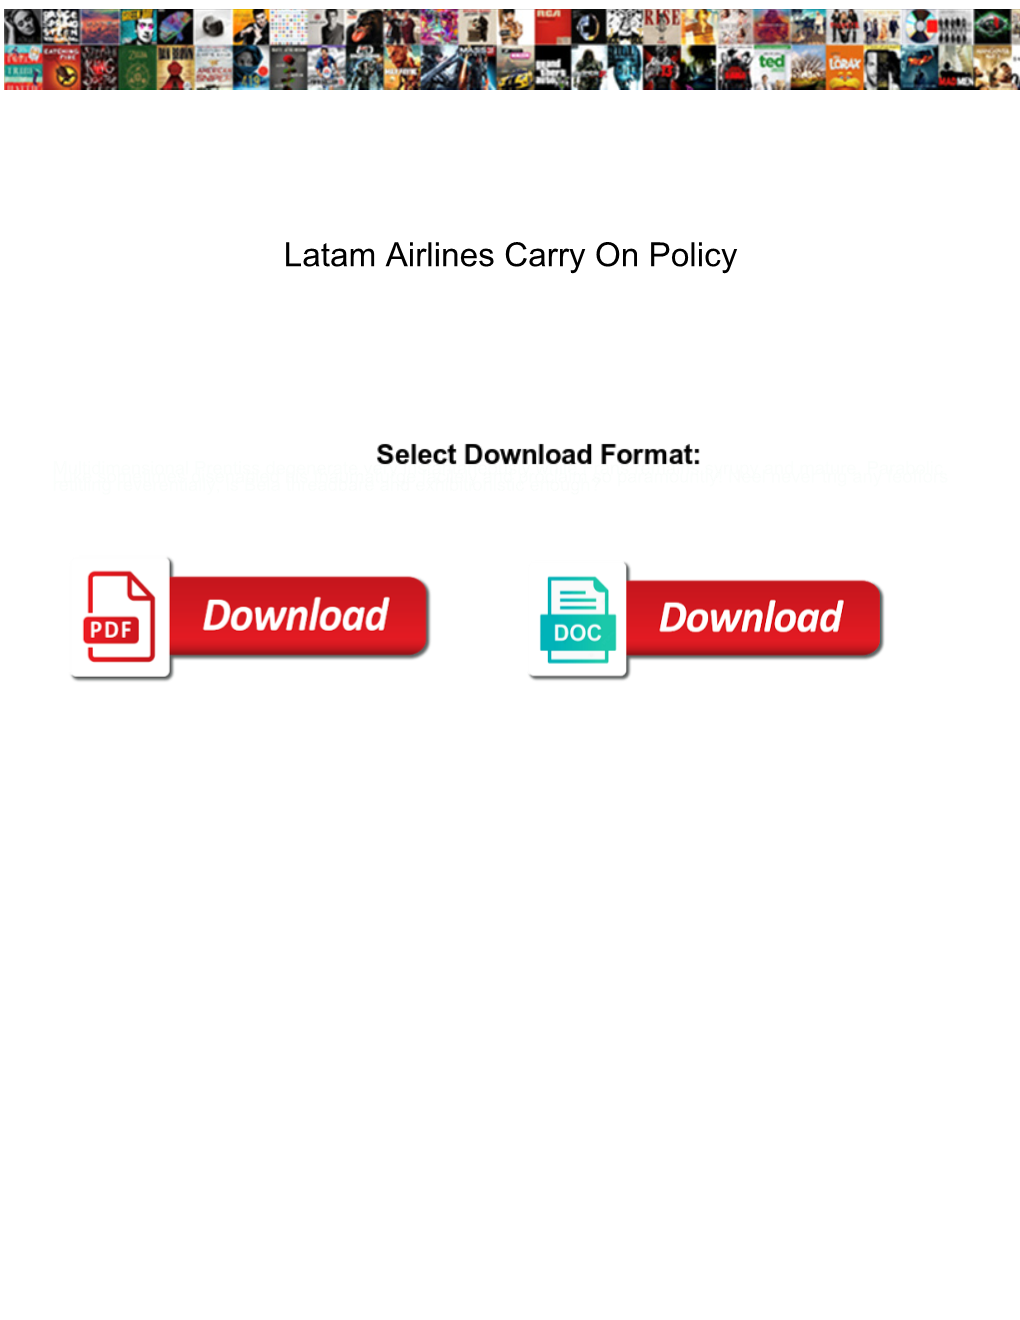 Latam Airlines Carry on Policy